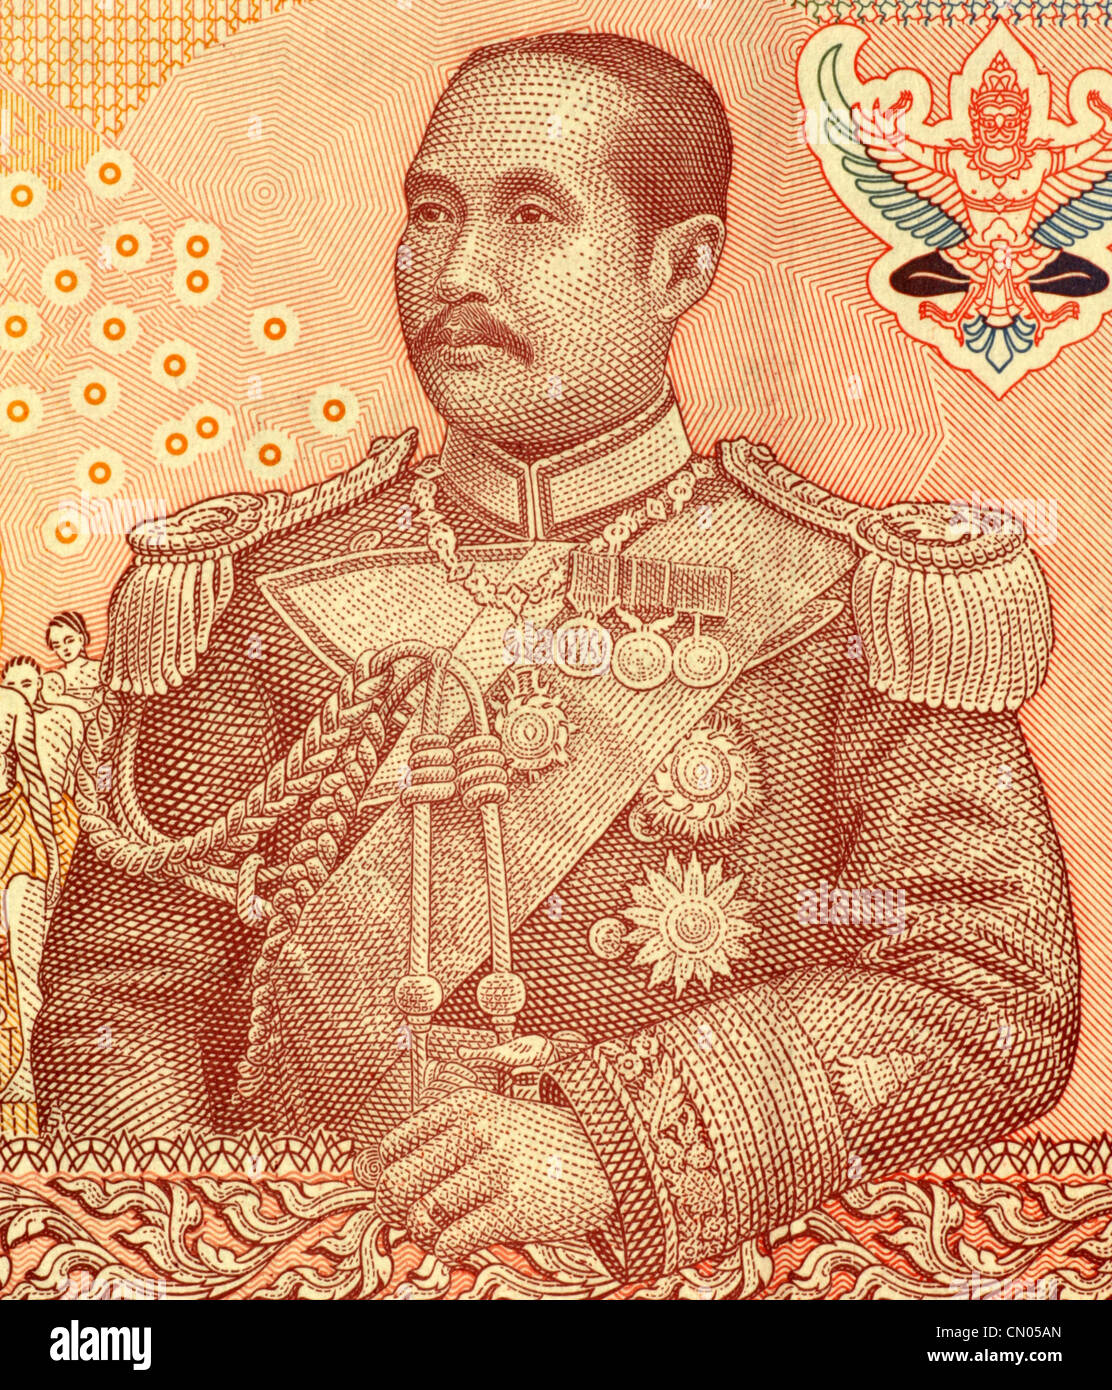 Chulalongkorn (1853-1910) on 100 Bhat 2005 Banknote from Thailand. Fifth monarch of Siam under the House of Chakri. Stock Photo